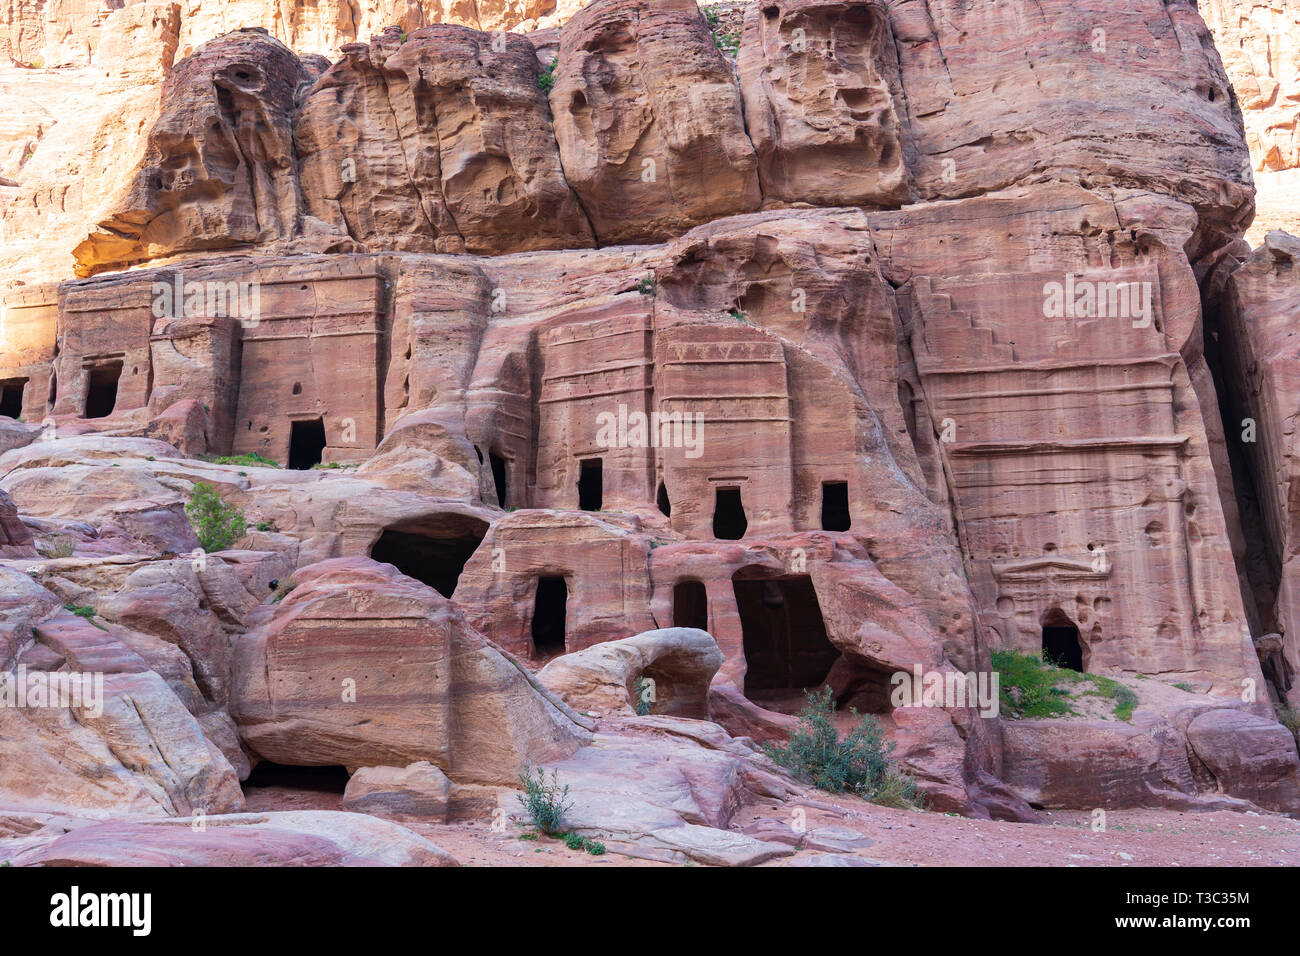 View of the Street of Facades in the ancient Nabatean city of Petra, Jordan. UNESCO World Heritage Site. Stock Photo